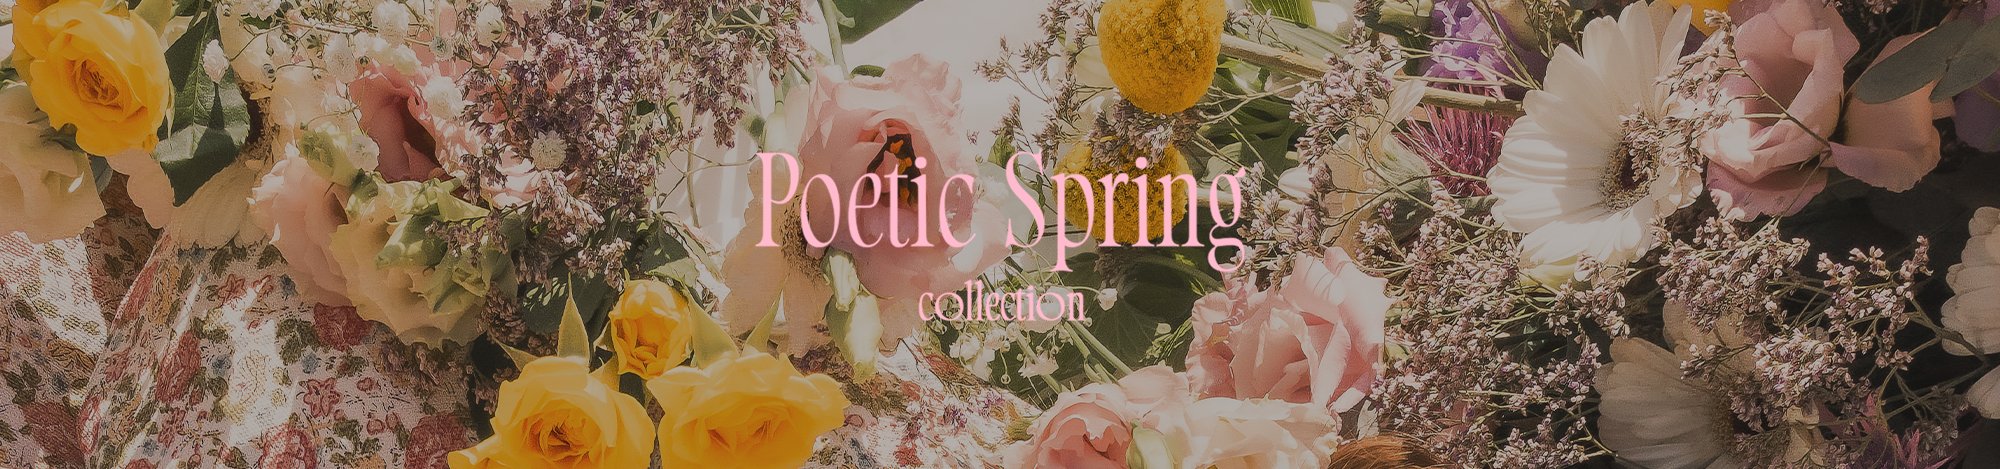 Poetic Spring Collection